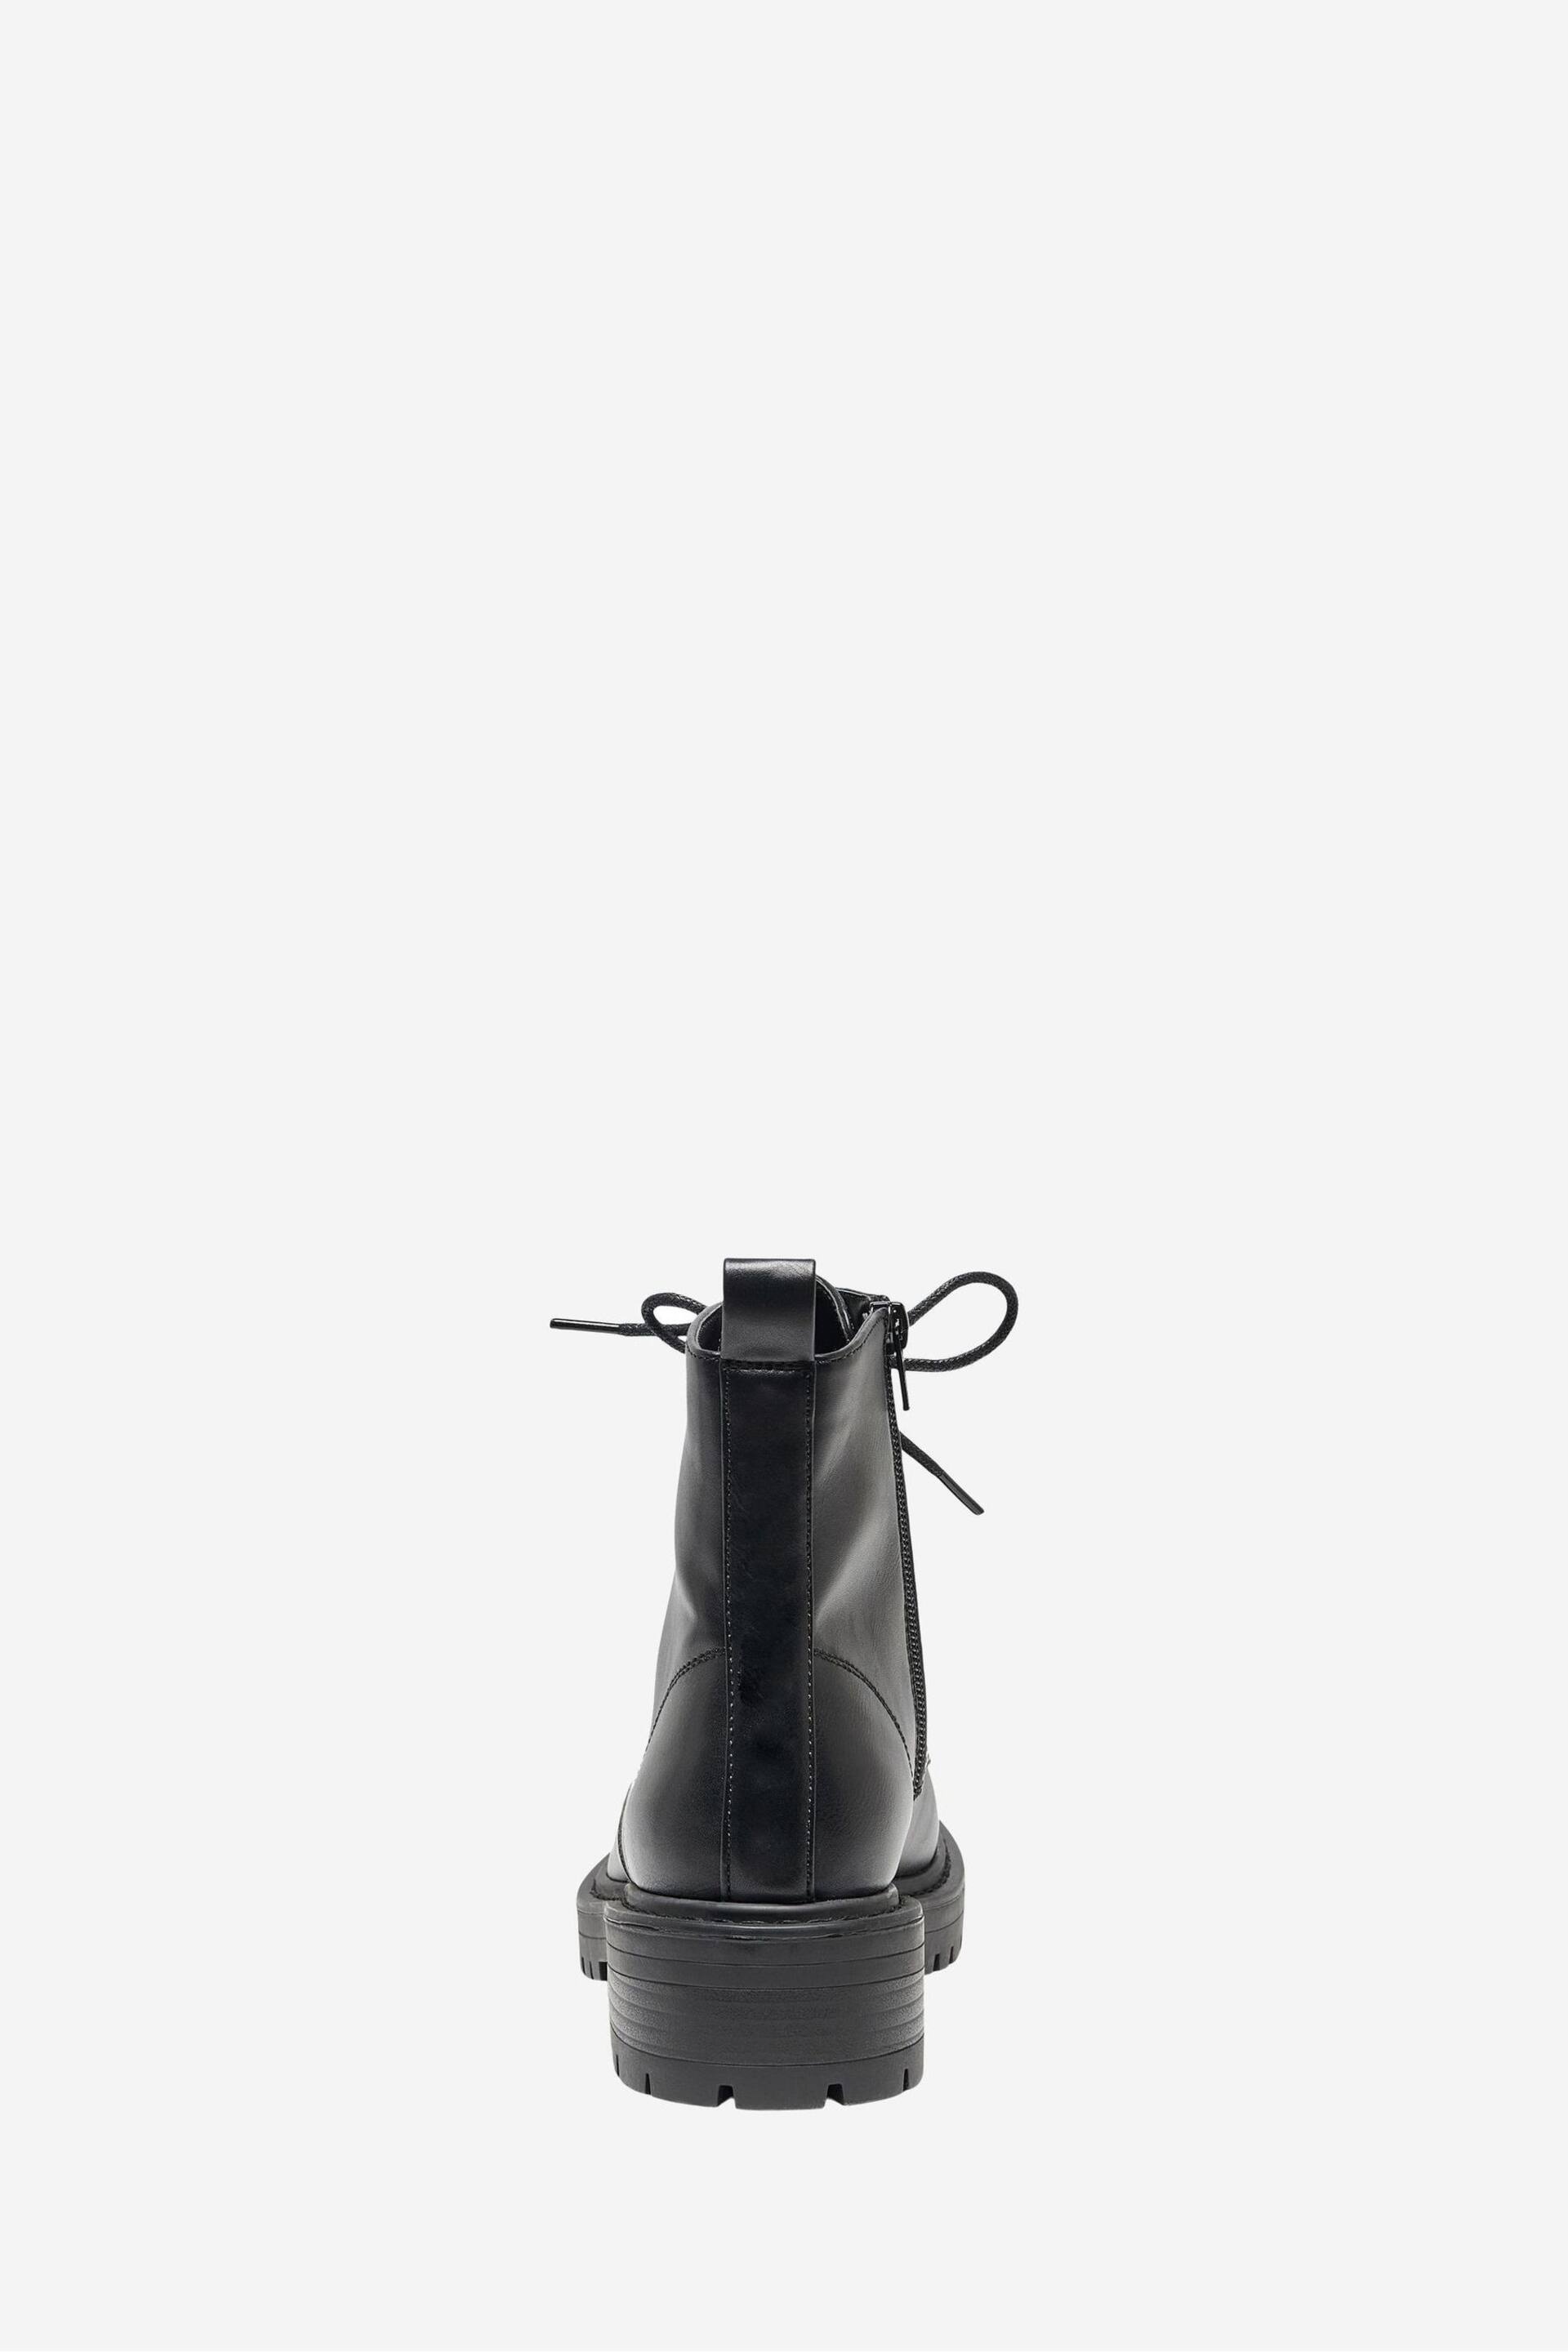 ONLY Black Faux Leather Lace Up Ankle Boot - Image 2 of 5